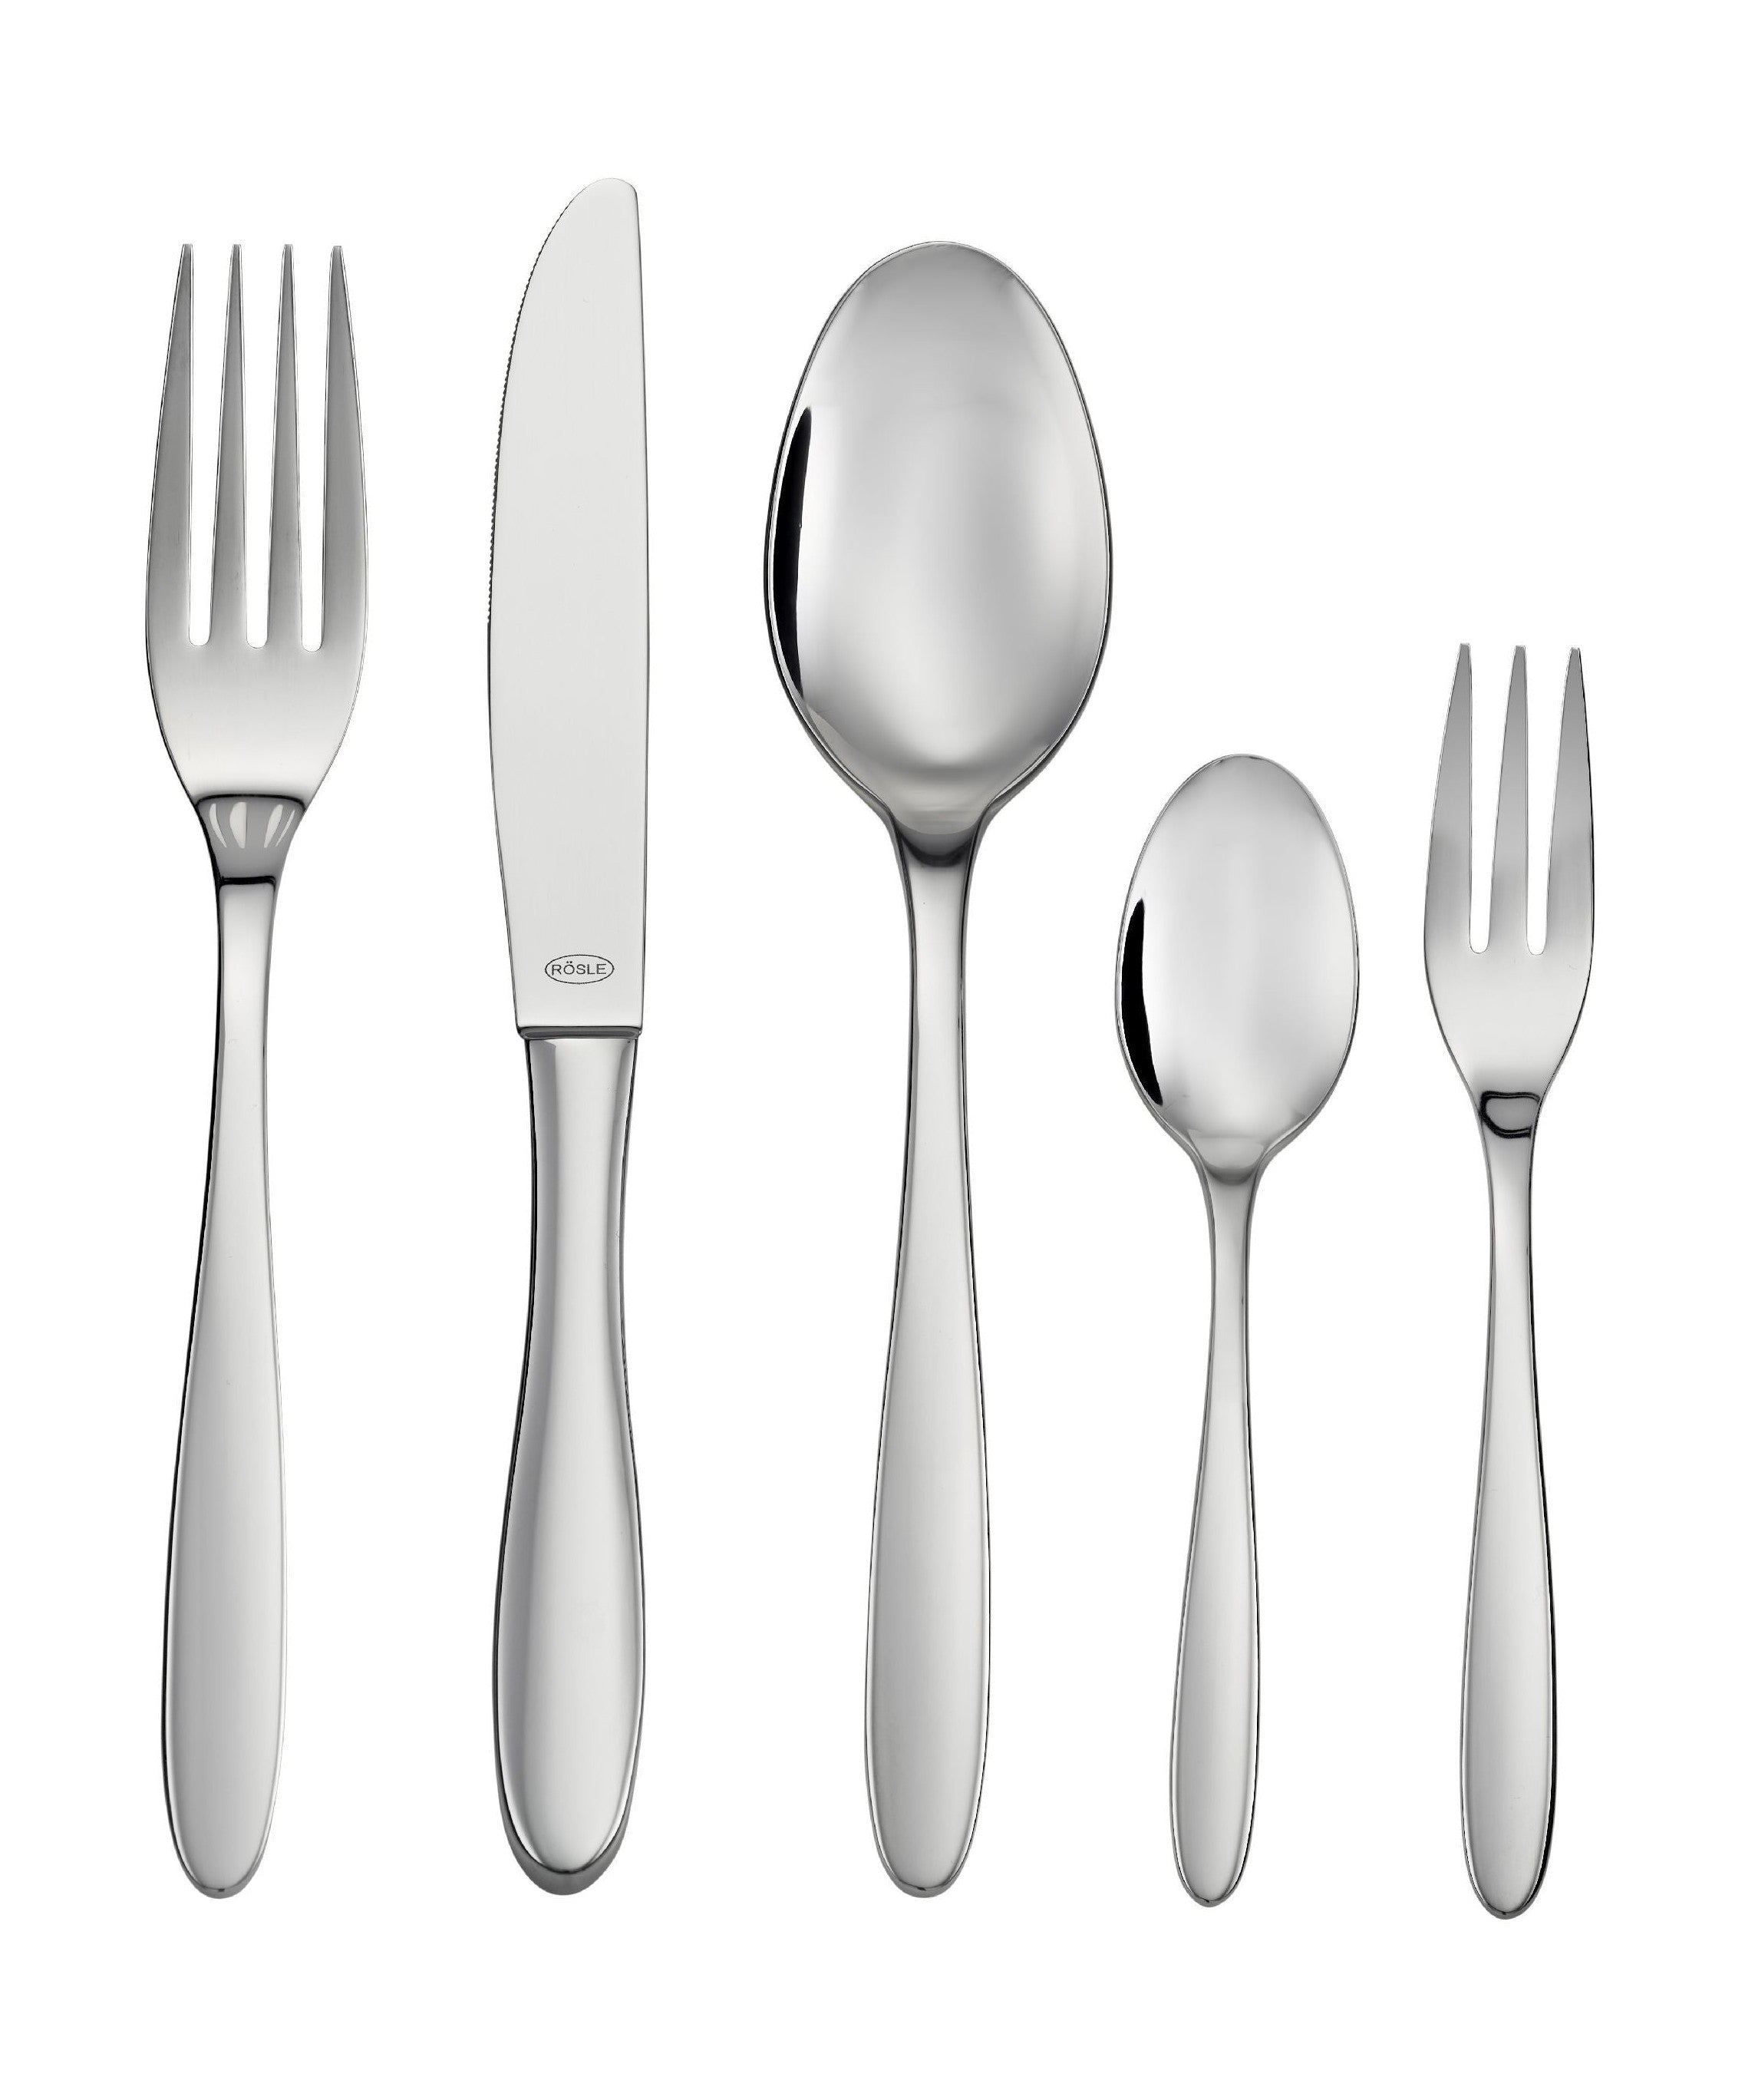 Rösle Culture Cutlery Set With 60 Pieces, Polished